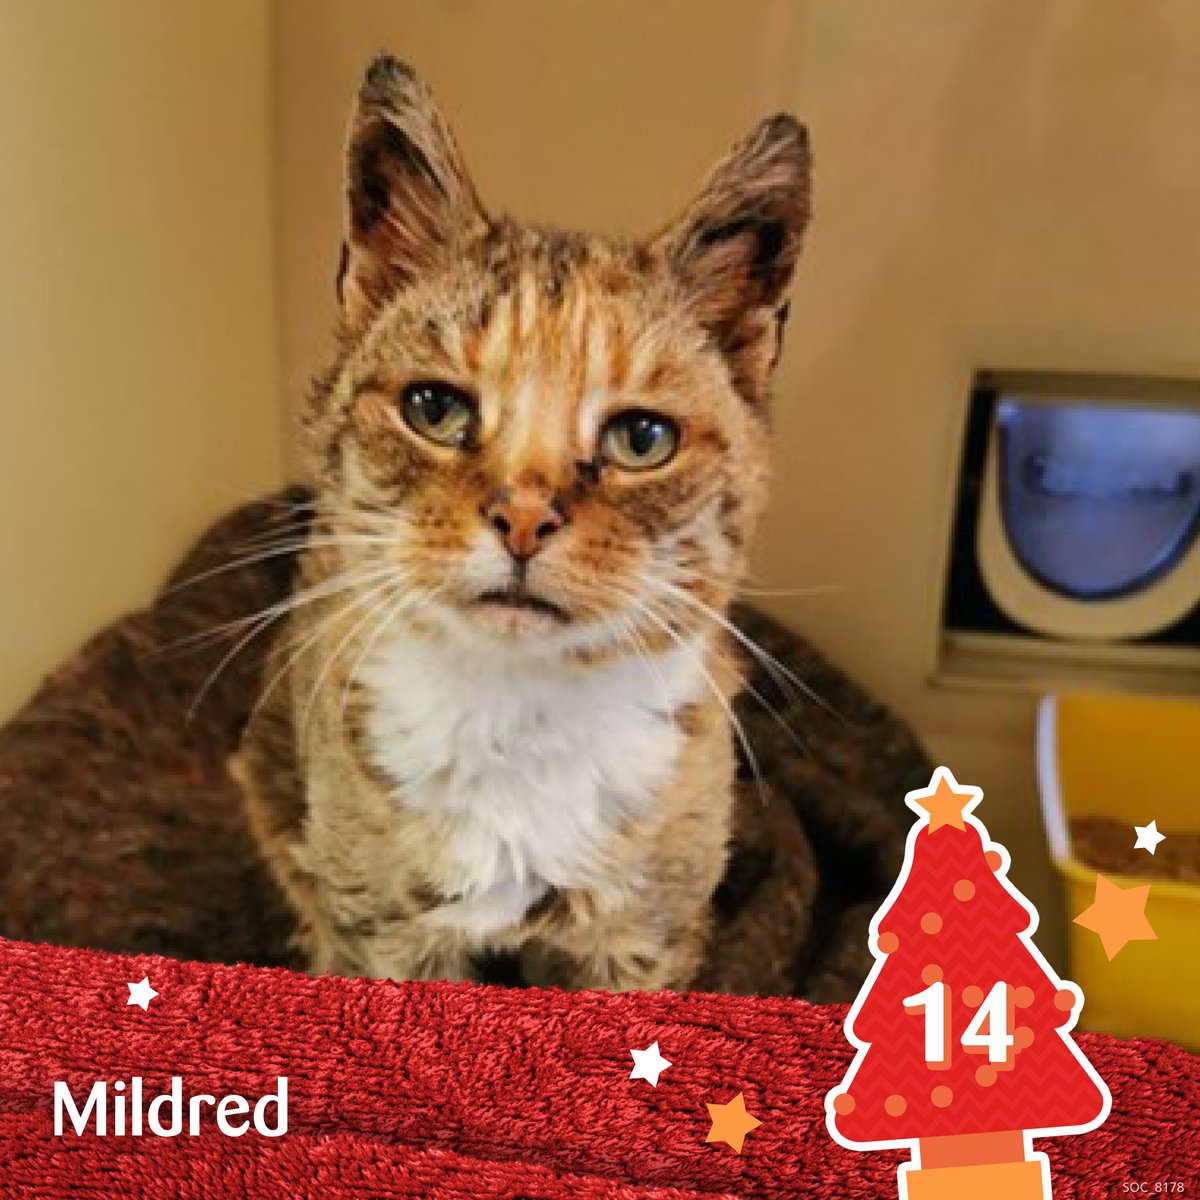 When bedraggled and emaciated Mildred was rescued from the streets, it was clear she was a #MatureMoggy. Imagine our surprise when the vet estimated her age to be around 20 years old! Find out more about caring for elderly cats: bit.ly/14Catvent
#CatventCalendar2022